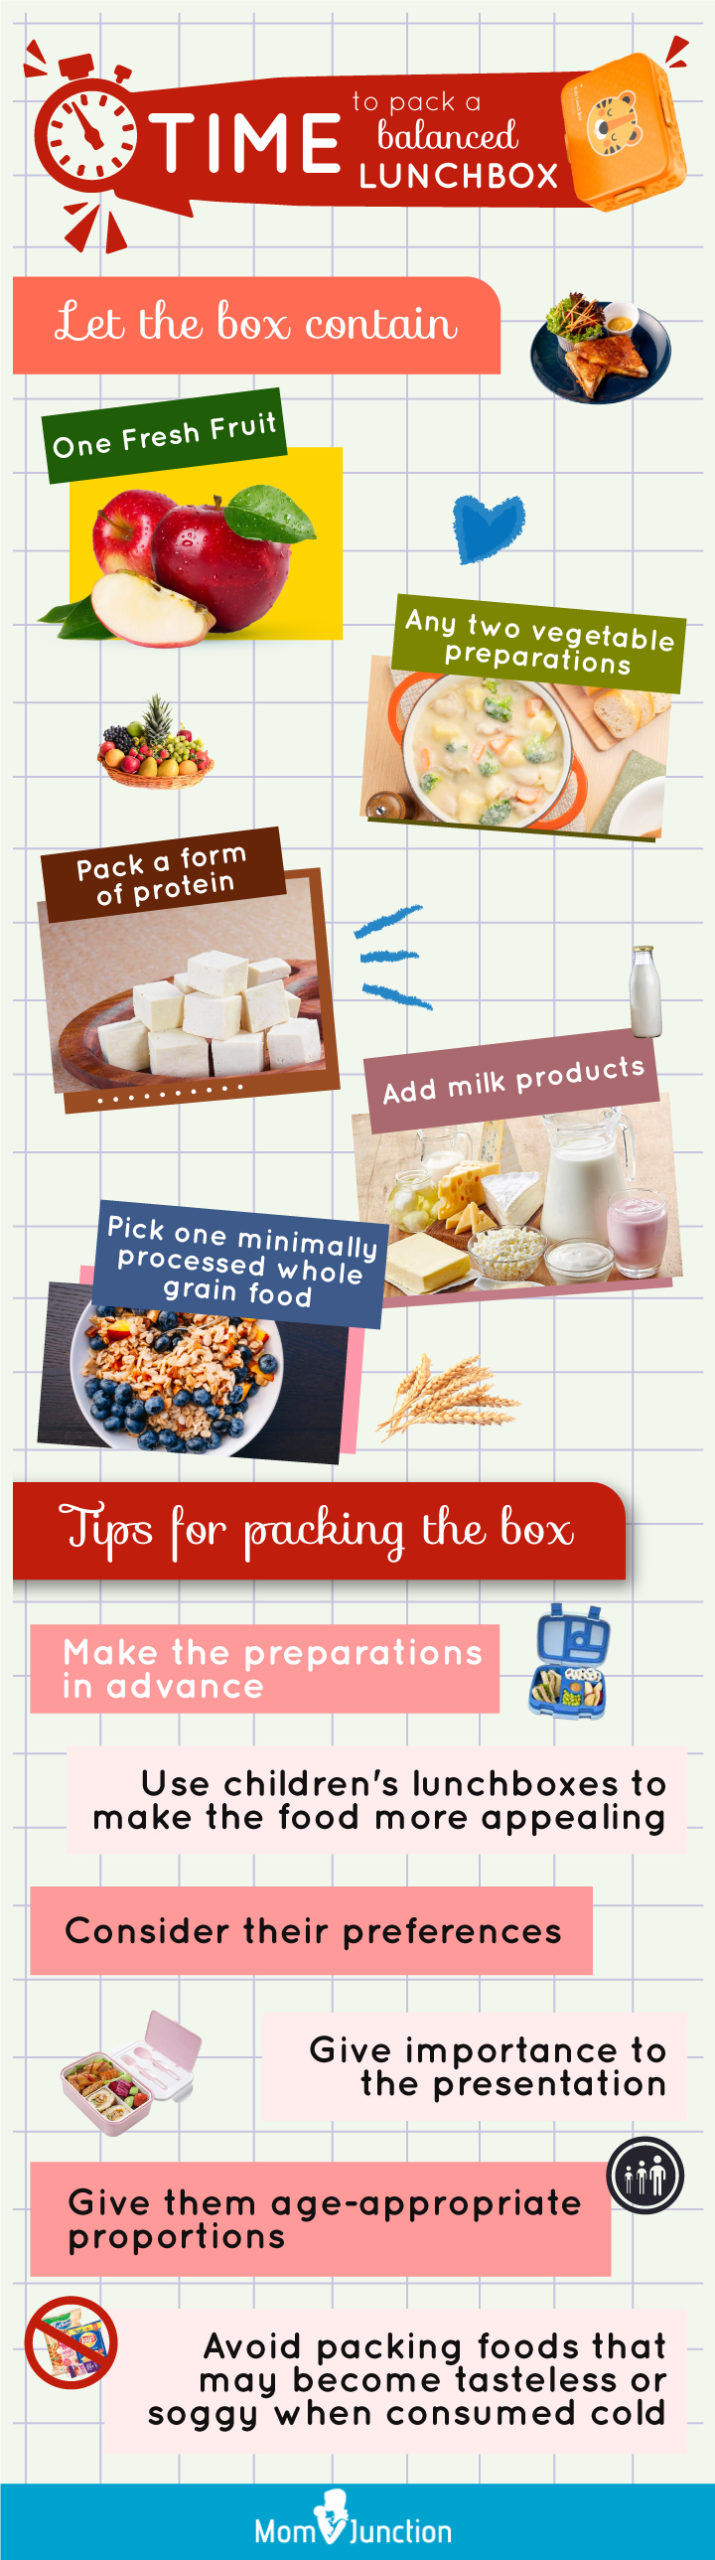 time to pack a balanced lunch box (infographic)